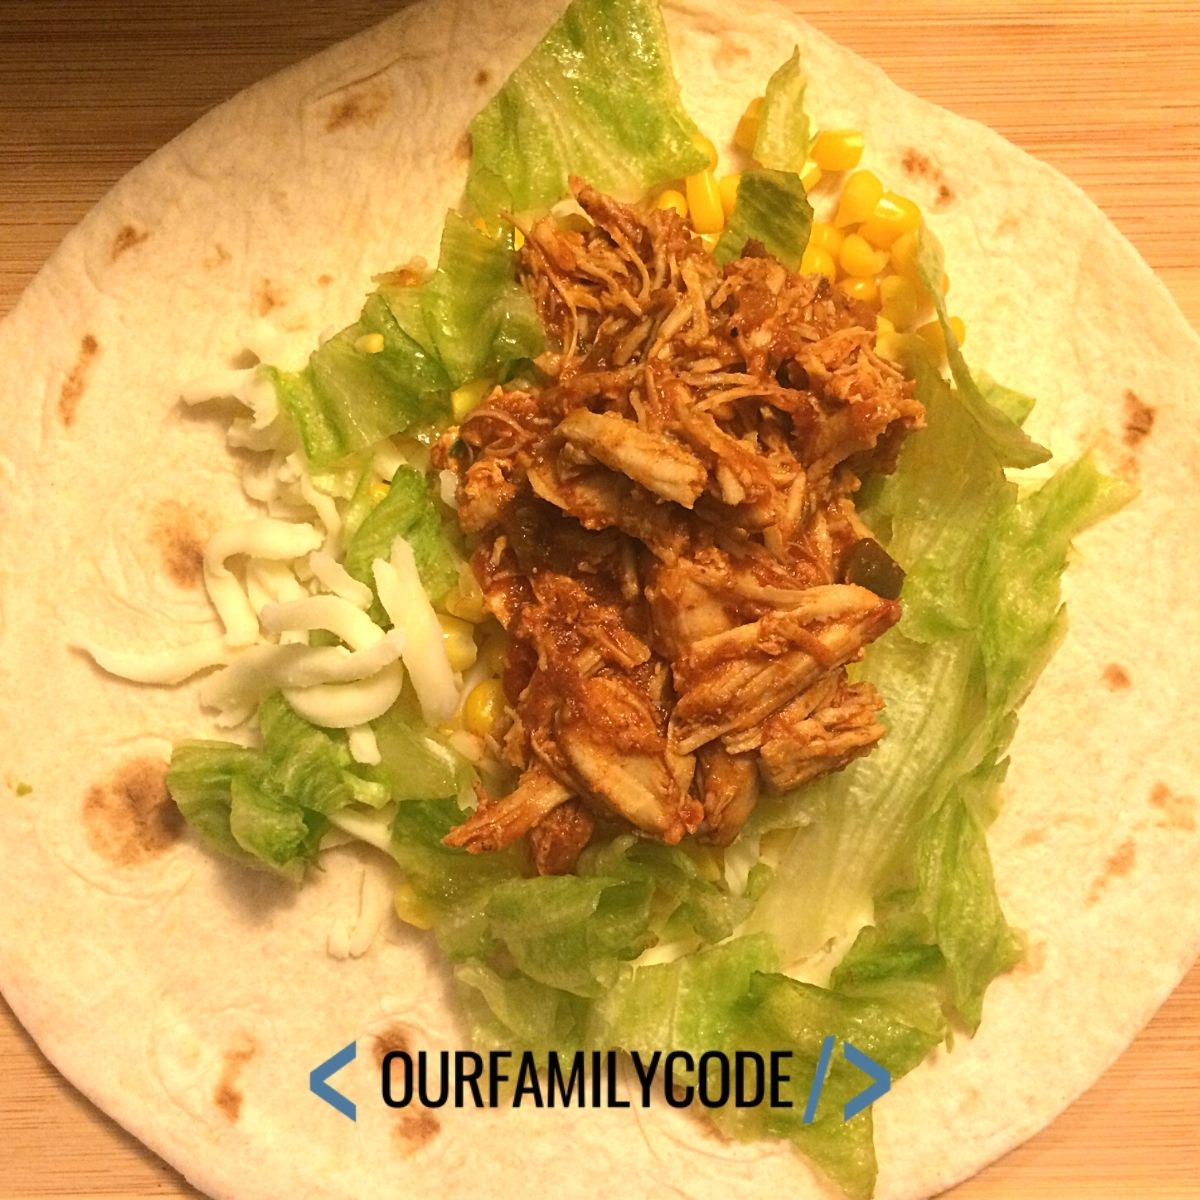 A picture of a shredded chicken taco on a soft tortilla with lettuce corn and cheese.